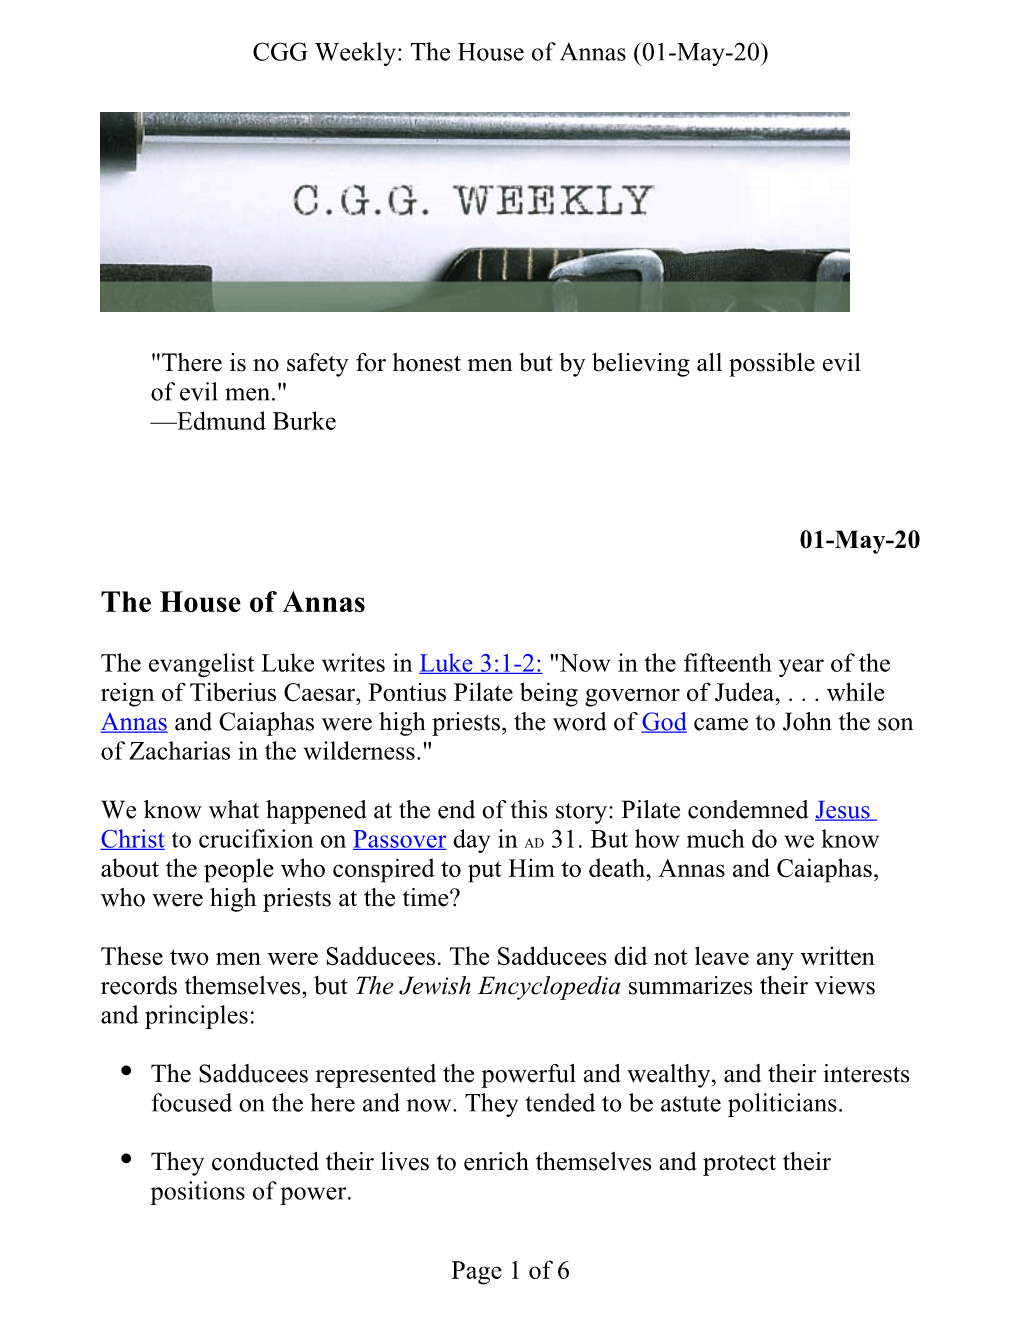 The House of Annas (01-May-20)